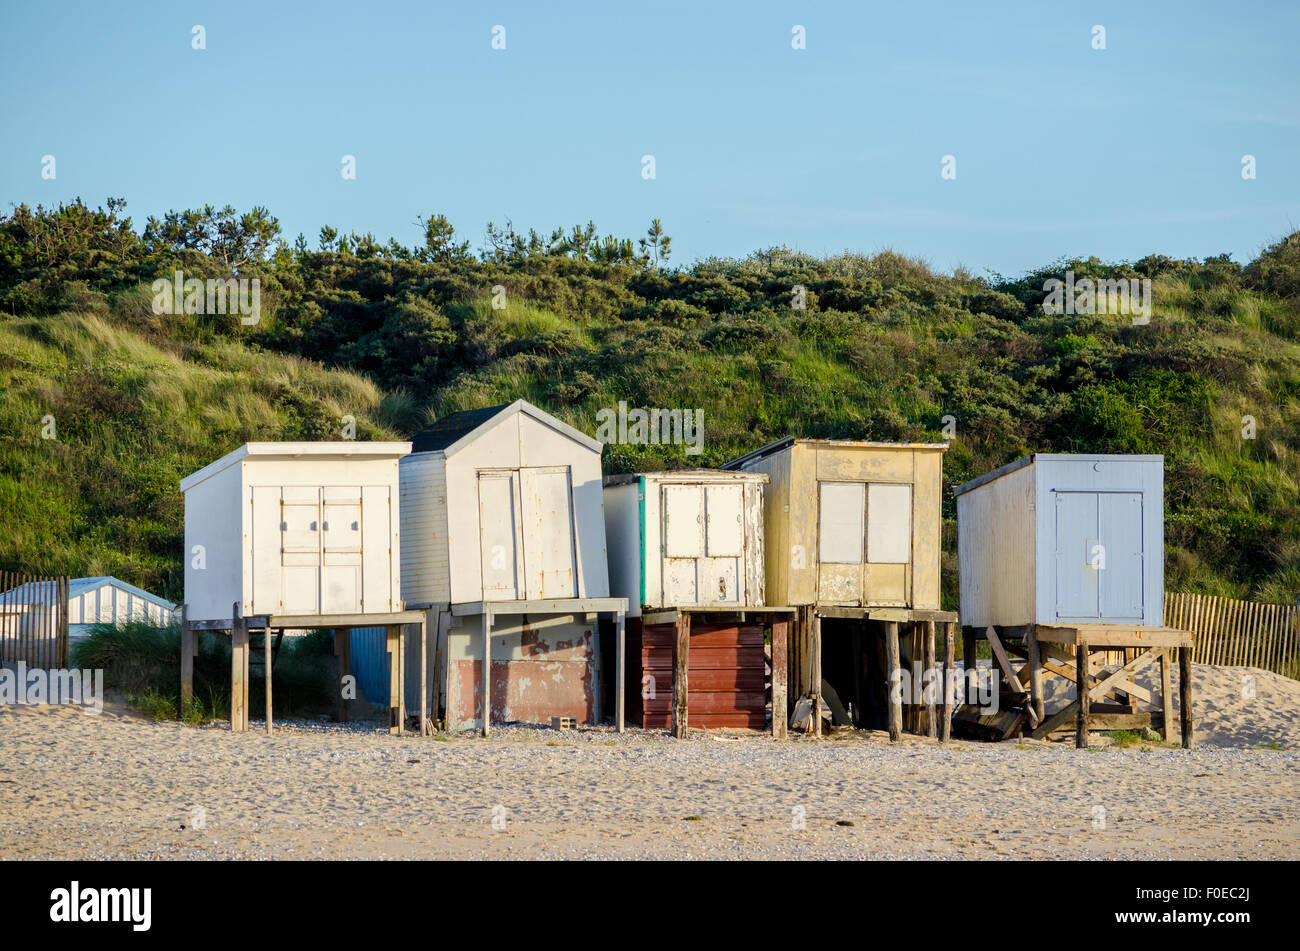 Cabins on the beach and sea front, in Calais, France Stock Photo